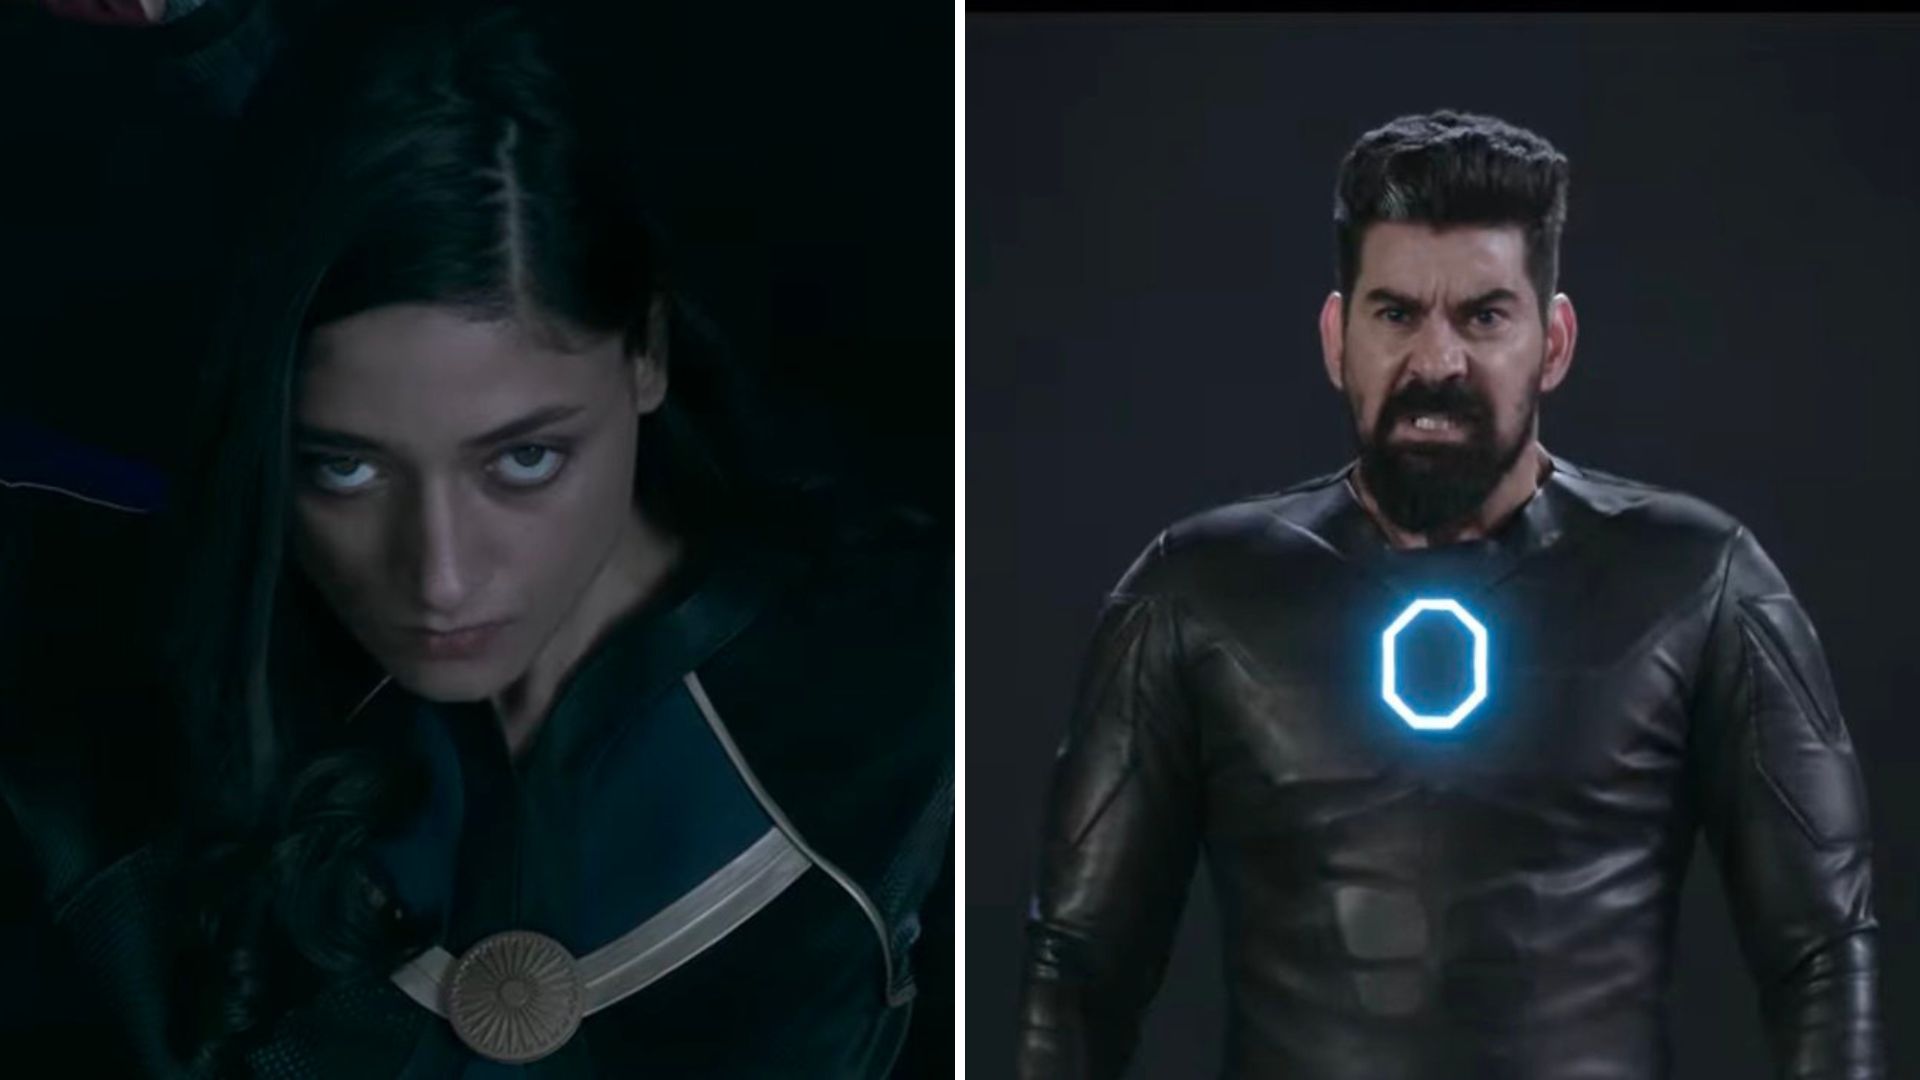 Are you aware of the upcoming release of the first Indian Supergirl movie?